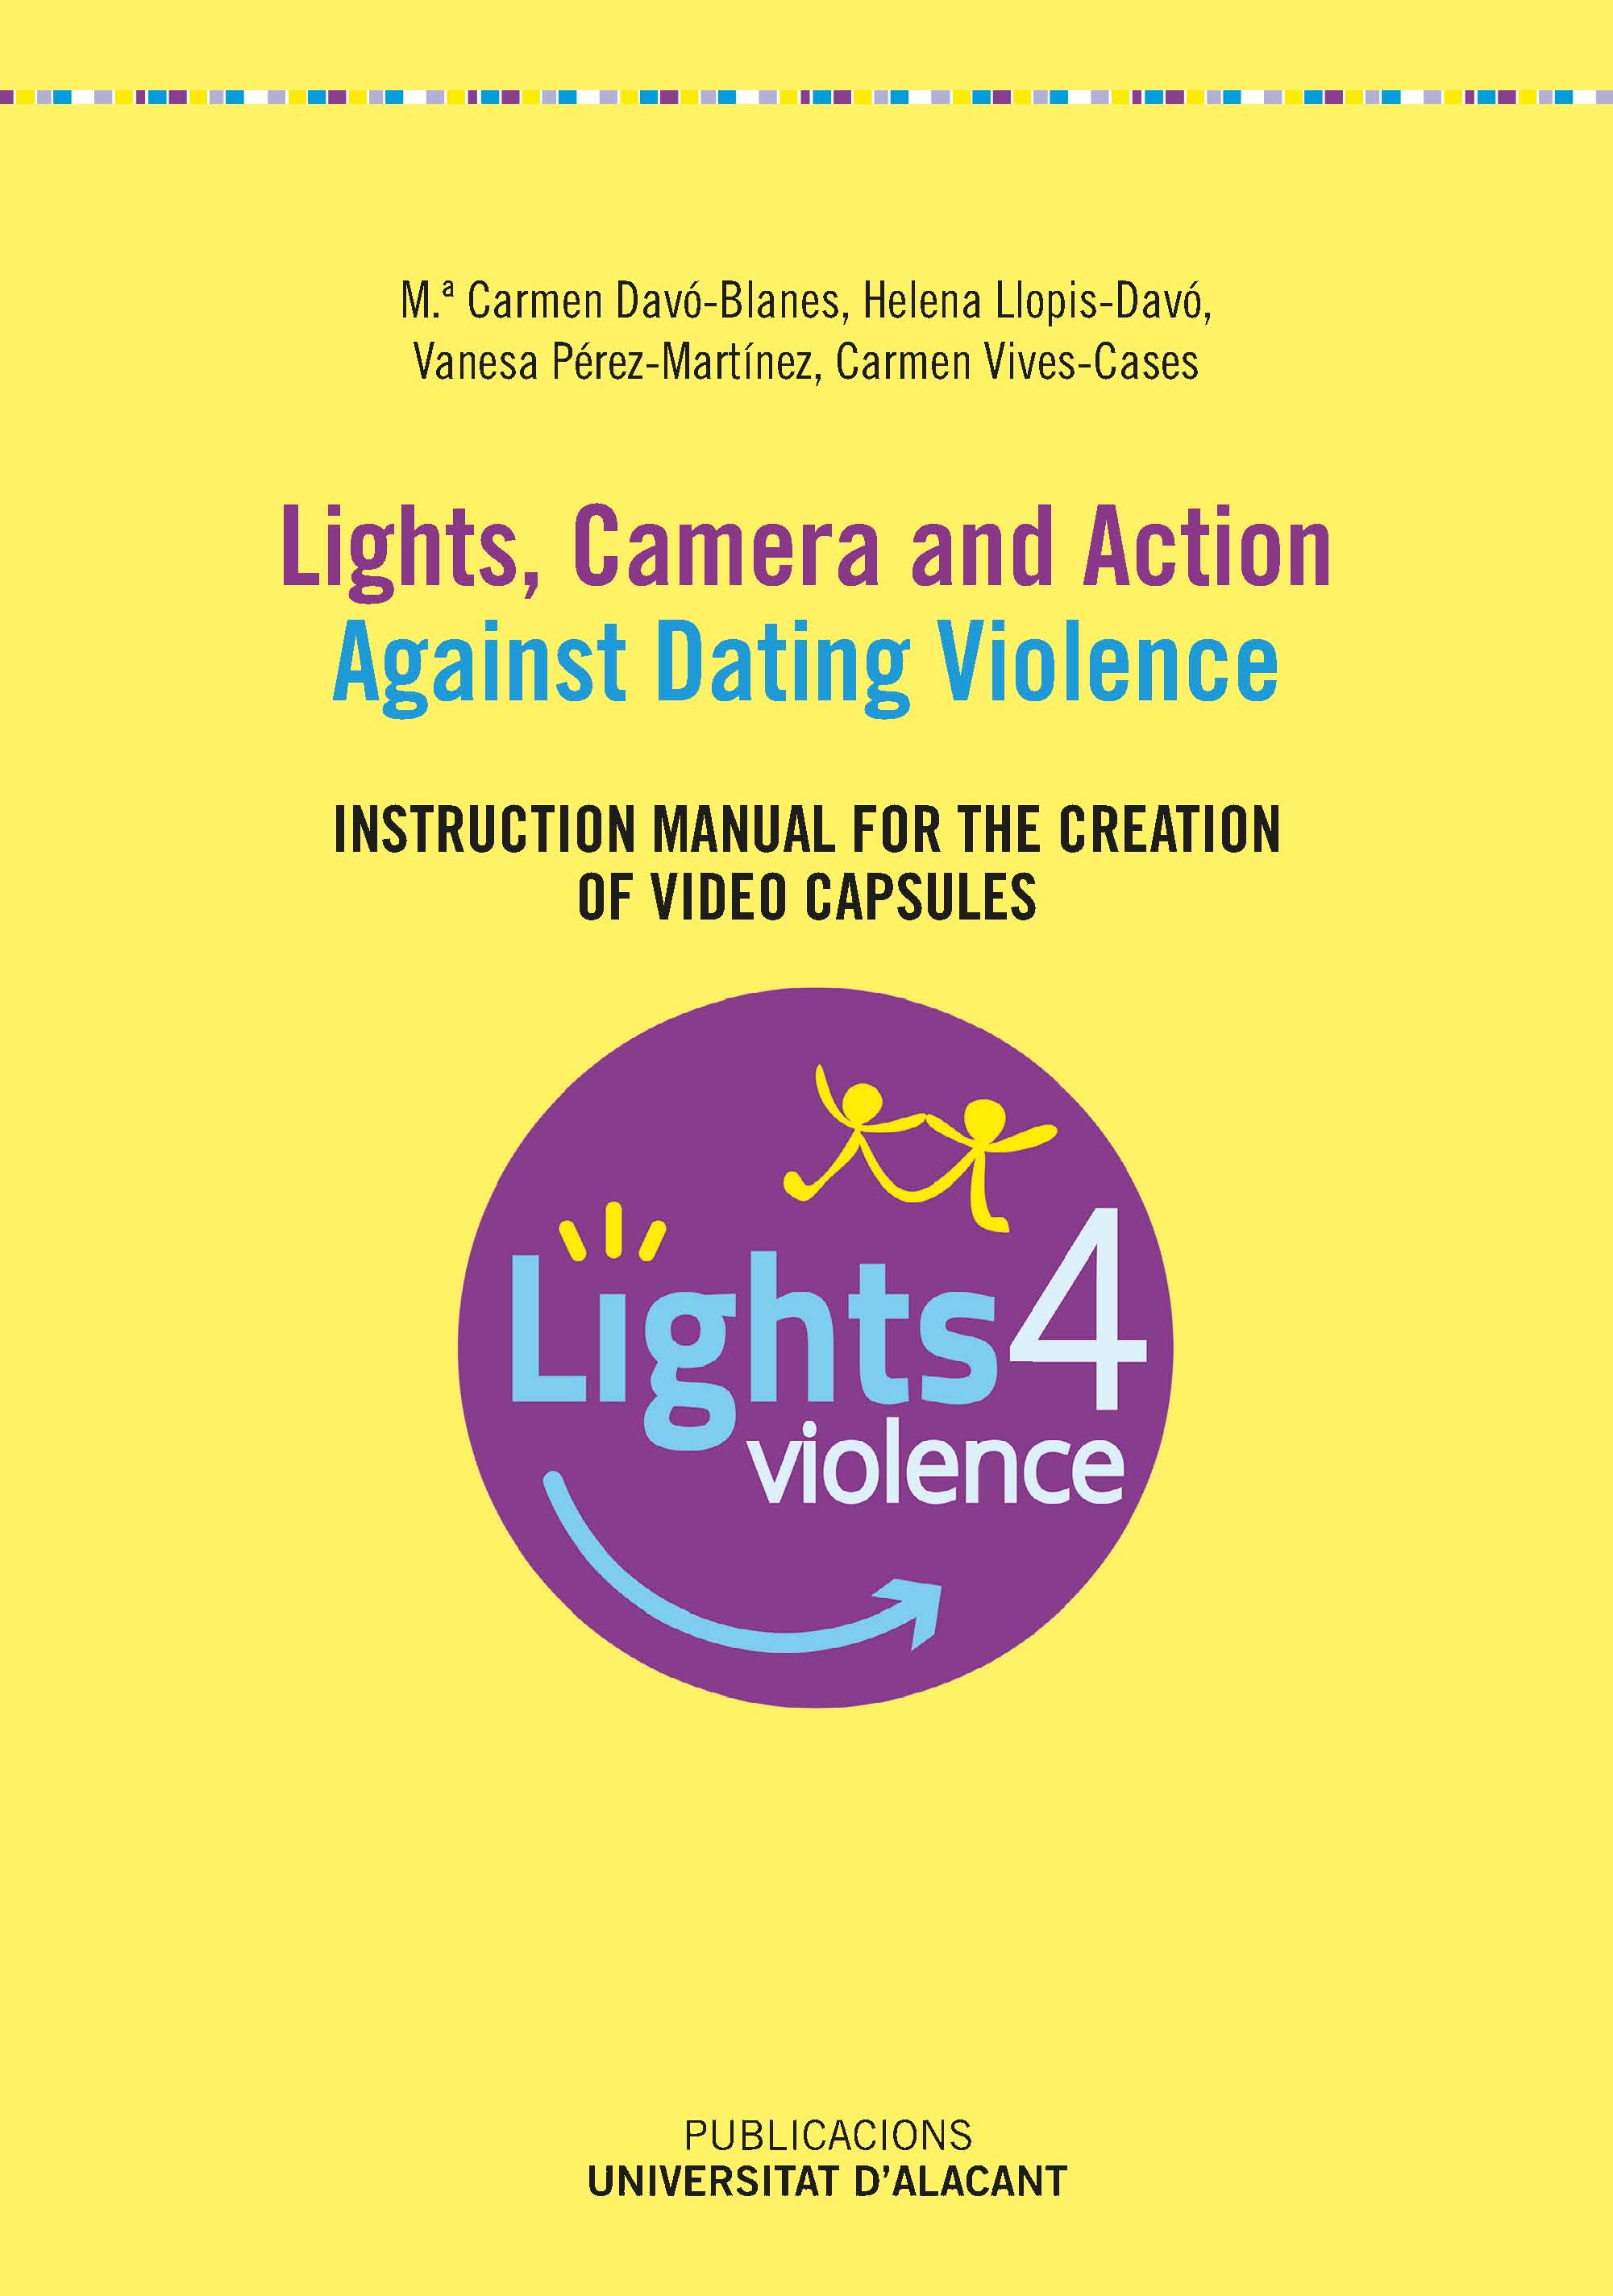 Lights, Camera and Action. Against Dating Violence